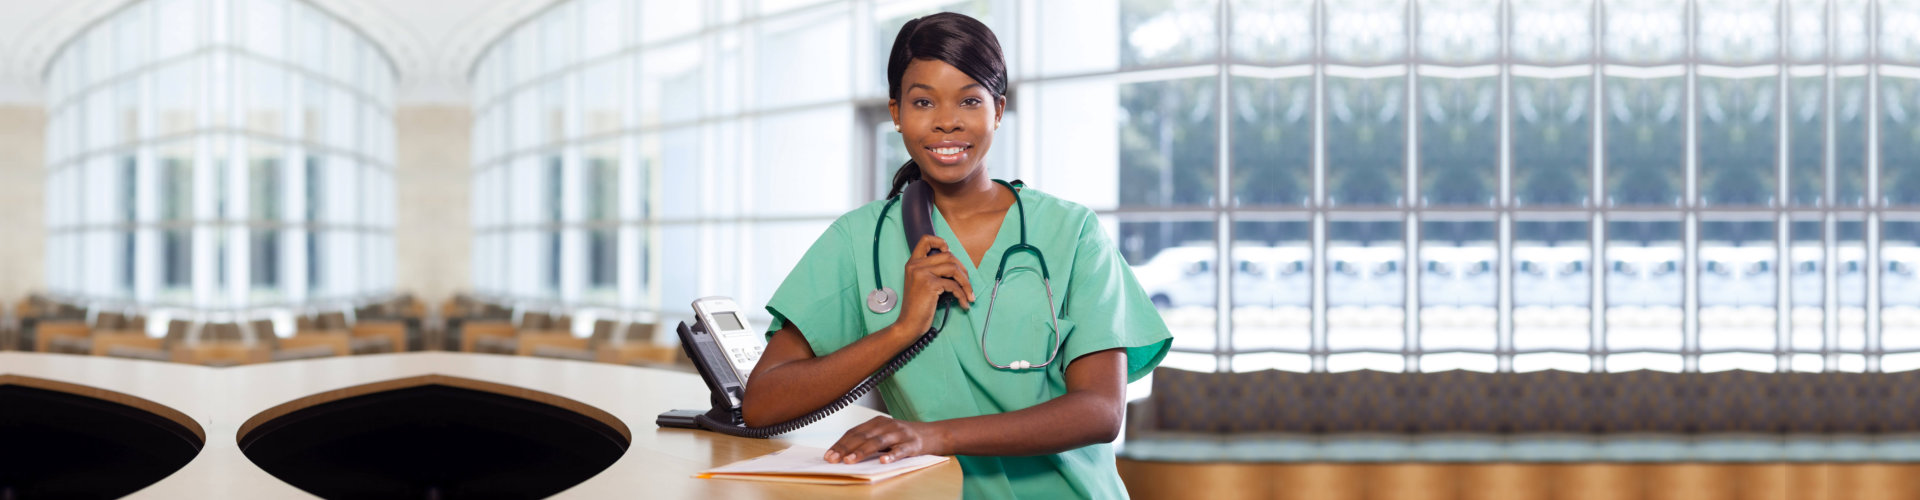 Smiling African American nurse at hospital work station lit brightly with phone and stethoscope.